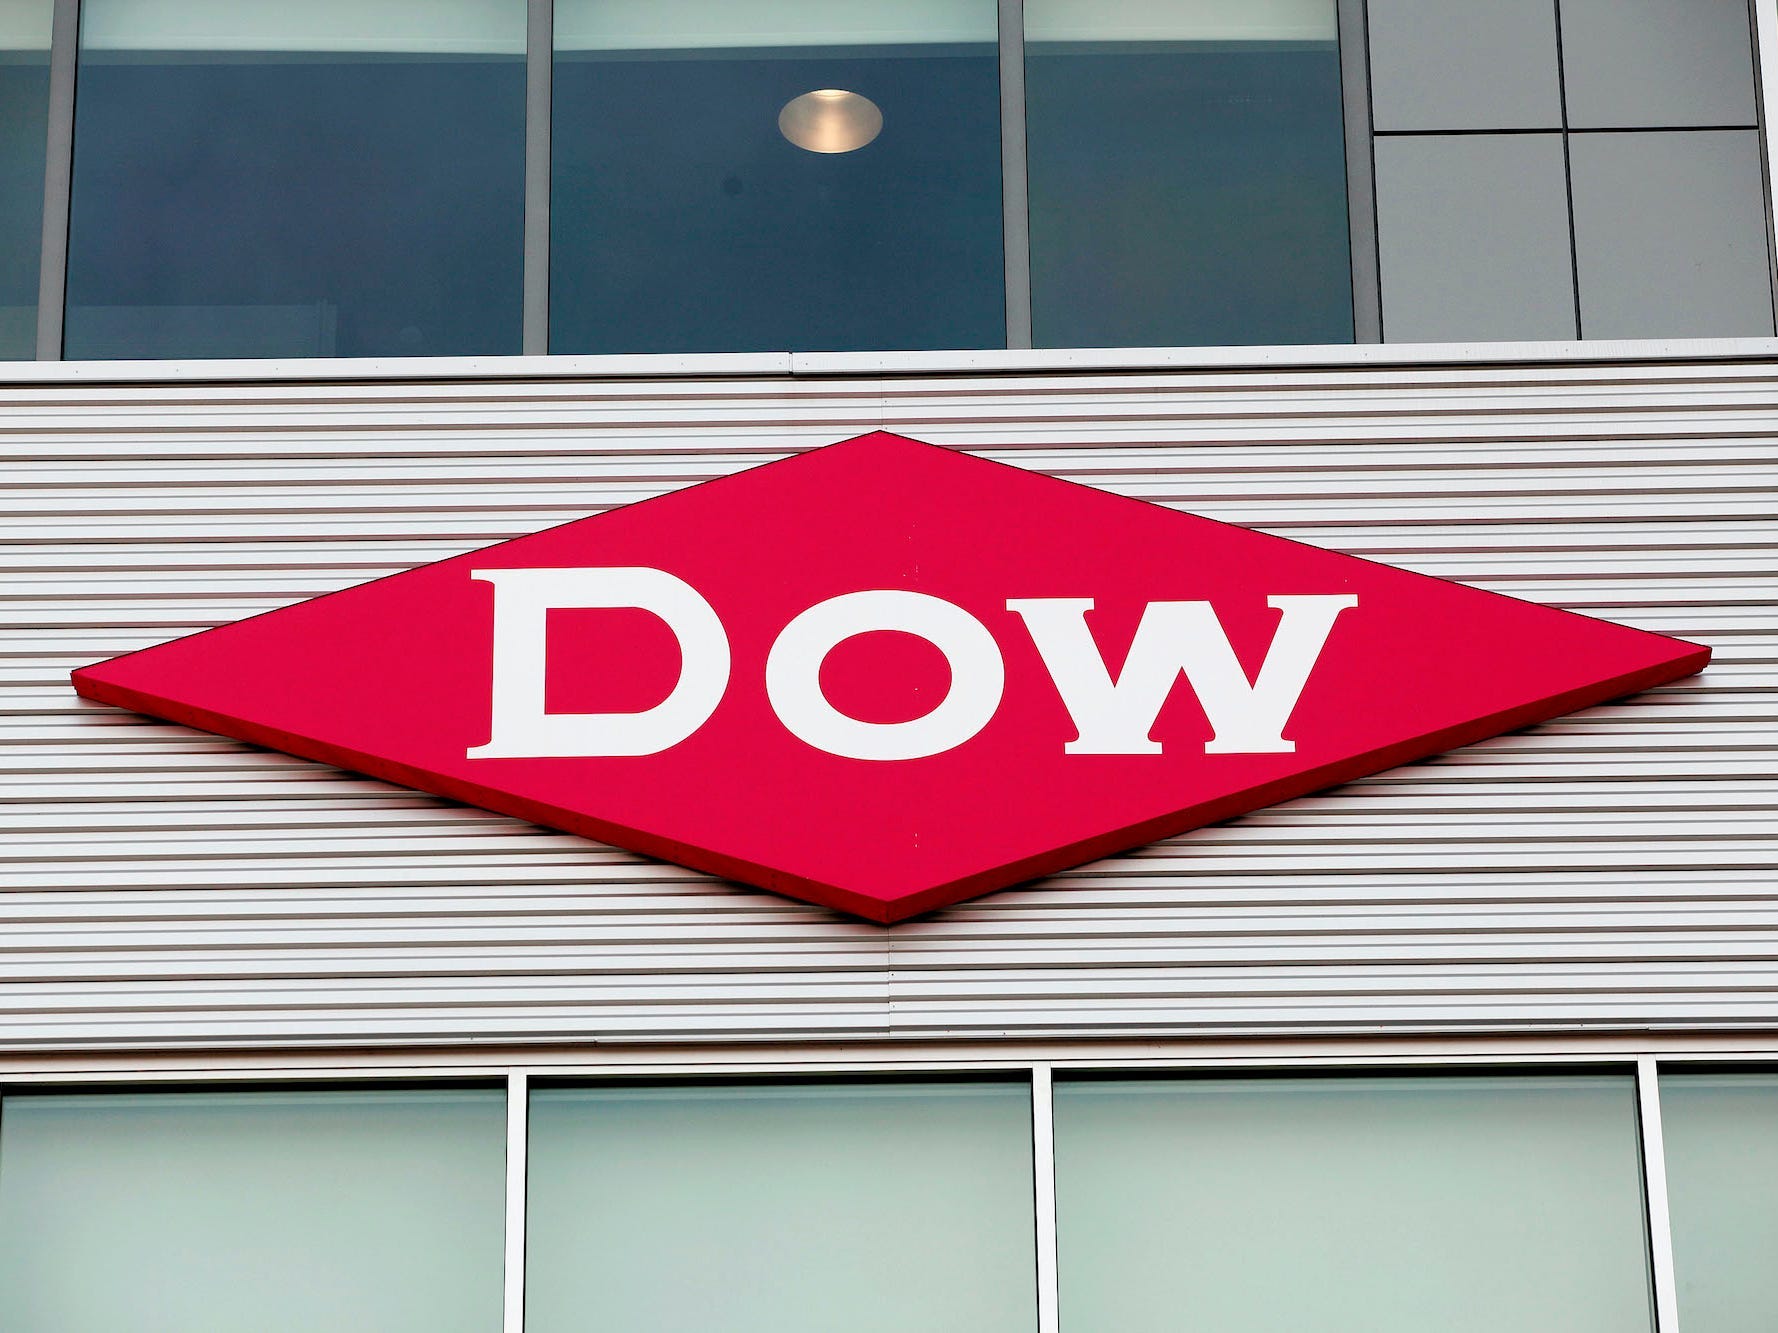 <p>Dow Inc. announced on January 26 that it will lay off 2,000 global employees, a move that indicates mass layoffs are spreading beyond just the technology sector, <a href="https://www.wsj.com/articles/dow-to-cut-2-000-jobs-globally-11674733667">the Wall Street Journal reported</a>. </p><p>The the cuts are part of a $1 billion cost-cutting effort intended to help amid "challenging energy markets," Dow CEO Jim Fitterling said in a <a href="https://corporate.dow.com/en-us/news/press-releases/dow-outlines-targeted-actions-to-deliver--1b-in-cost-savings-in-" rel="noopener">press release</a>. The chemical company will also shut down select assets, mostly in Europe, per the release.</p><p>"We are taking these actions to further optimize our cost structure and prioritize business operations toward our most competitive, cost-advantaged and growth-oriented markets, while also navigating macro uncertainties and challenging energy markets, particularly in Europe," Fittlering said. </p>